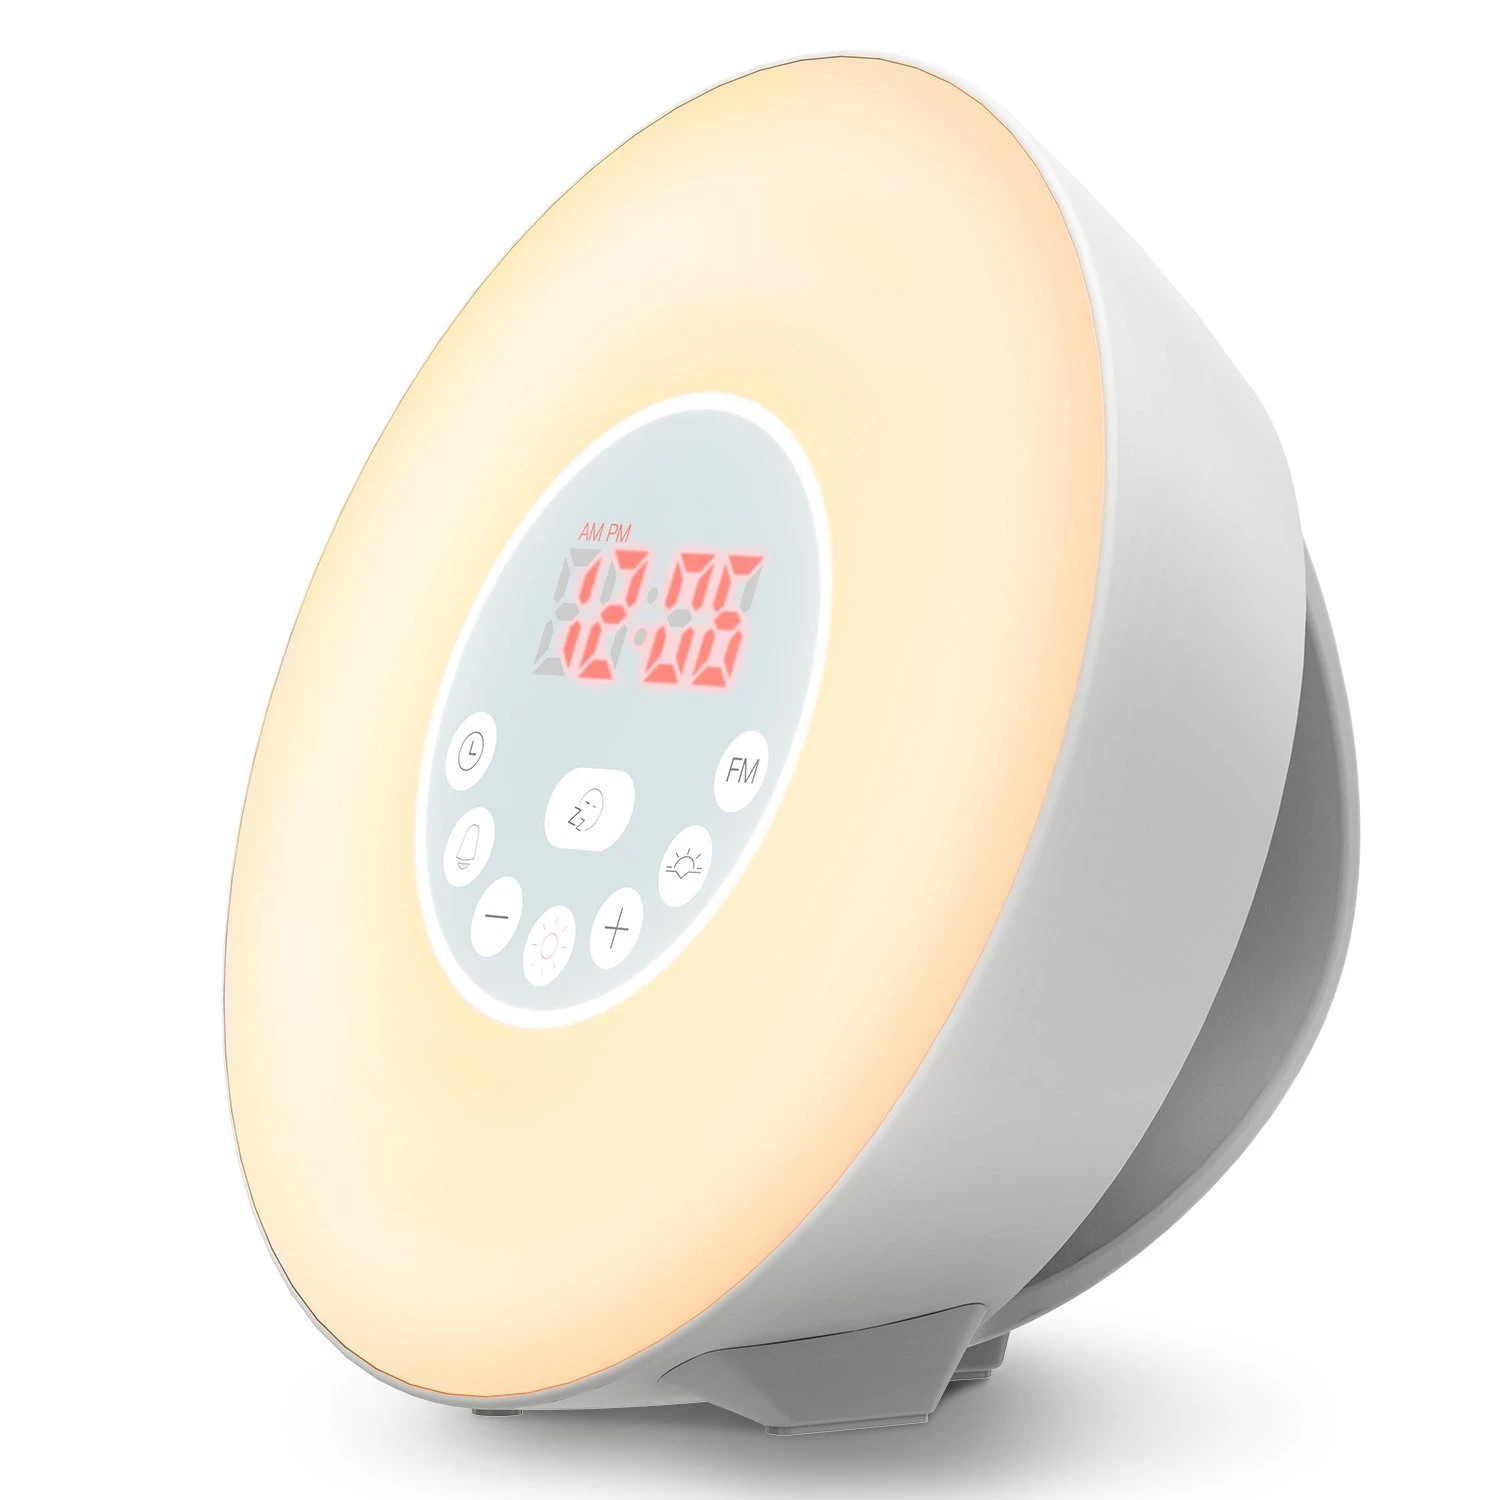 2020 New design 7 color changing touch wake up light alarm clock with wake up light and FM Radio